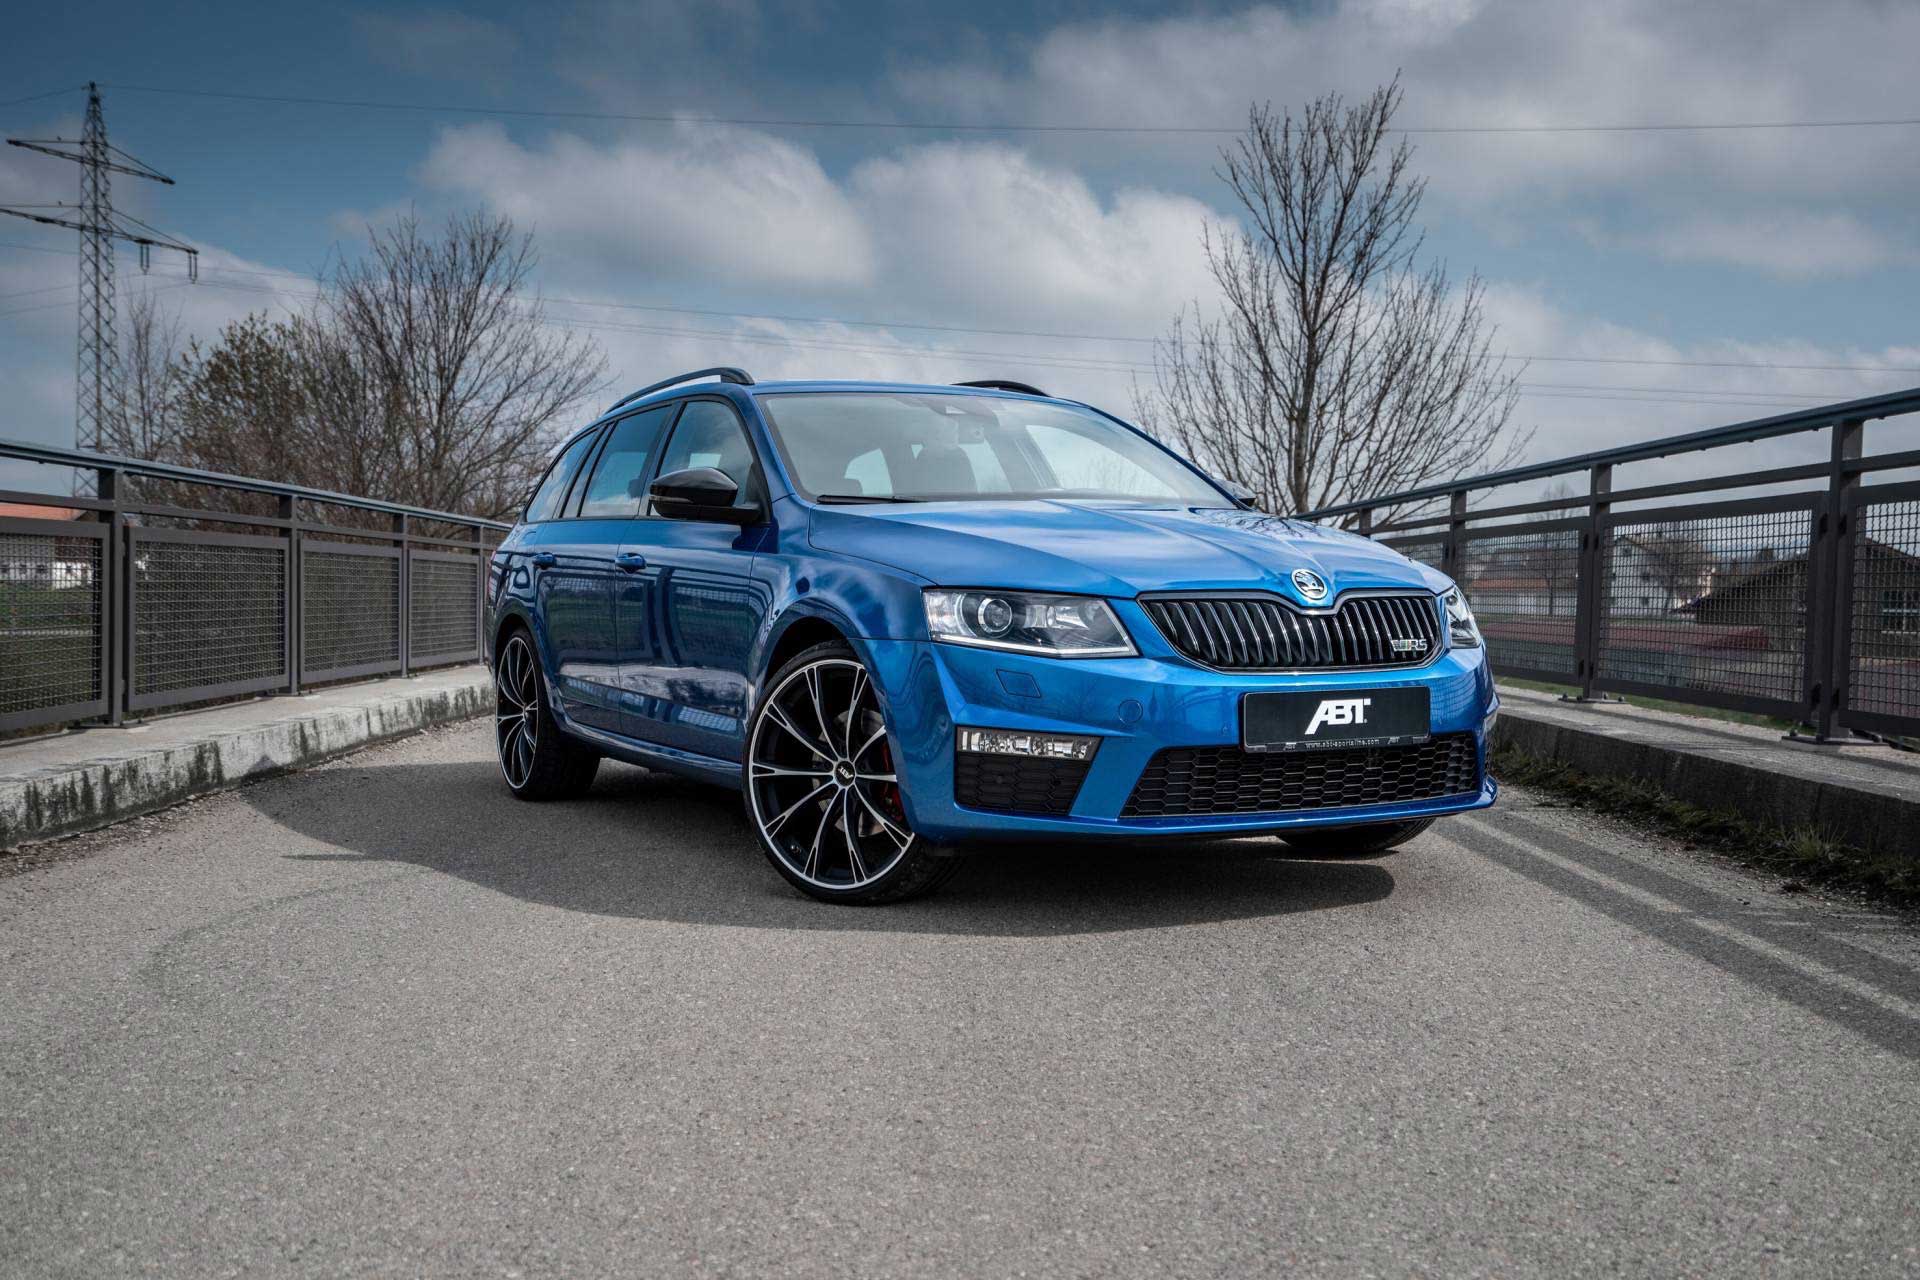 Skoda octavia rs 2016. Škoda Octavia RS 2019. Škoda Octavia RS a7.